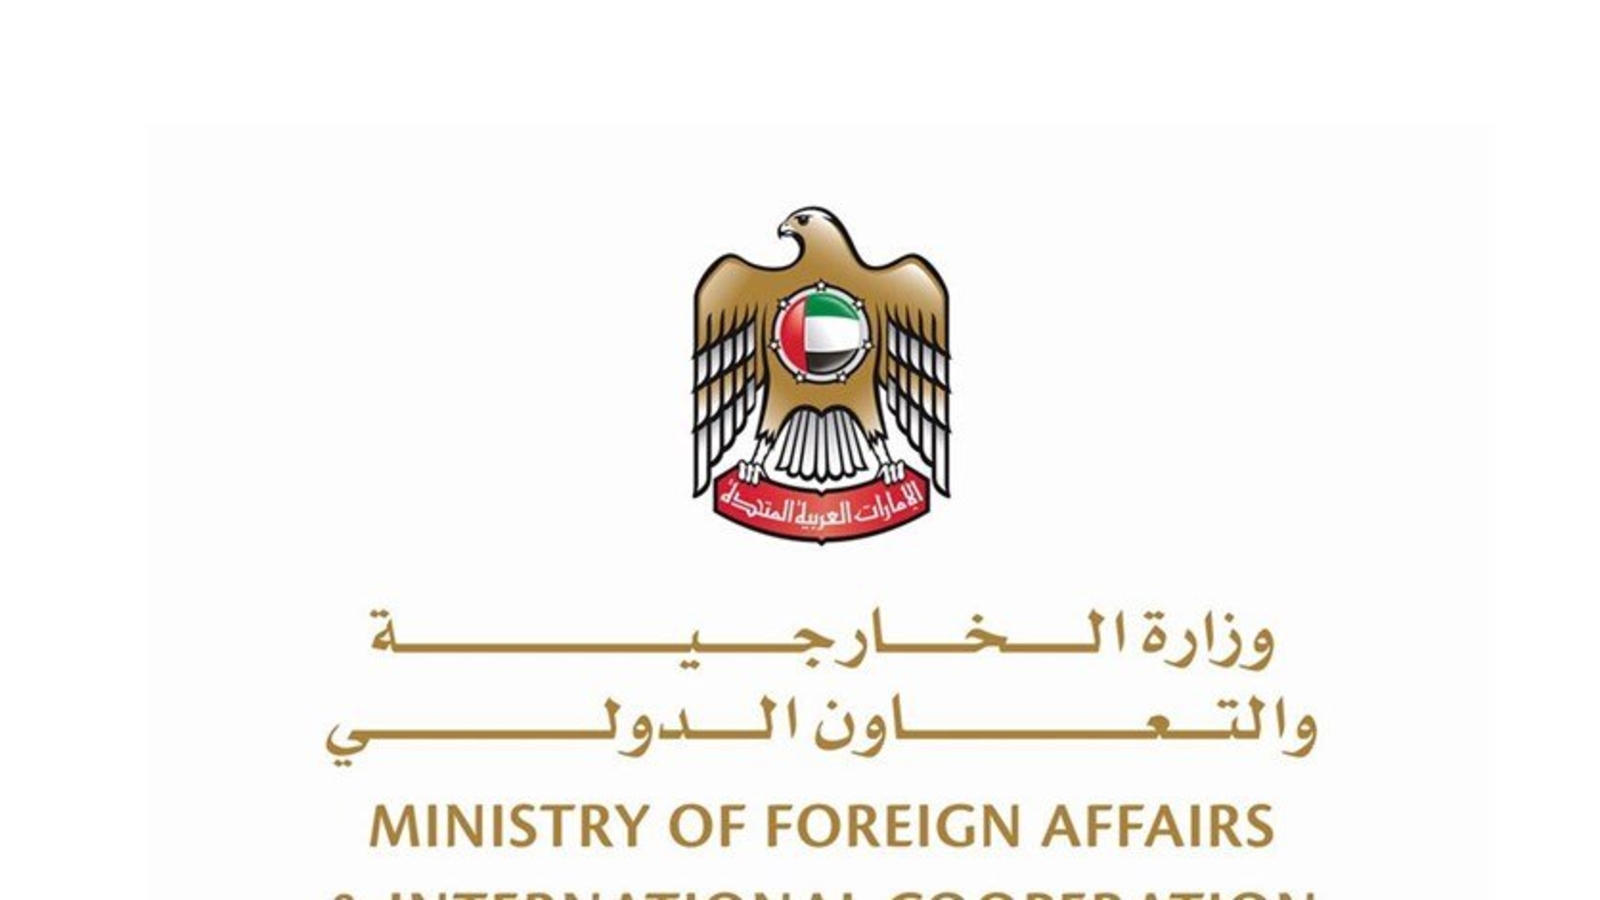 UAE welcomes the results of the meeting of the Libyan parties in Cairo.